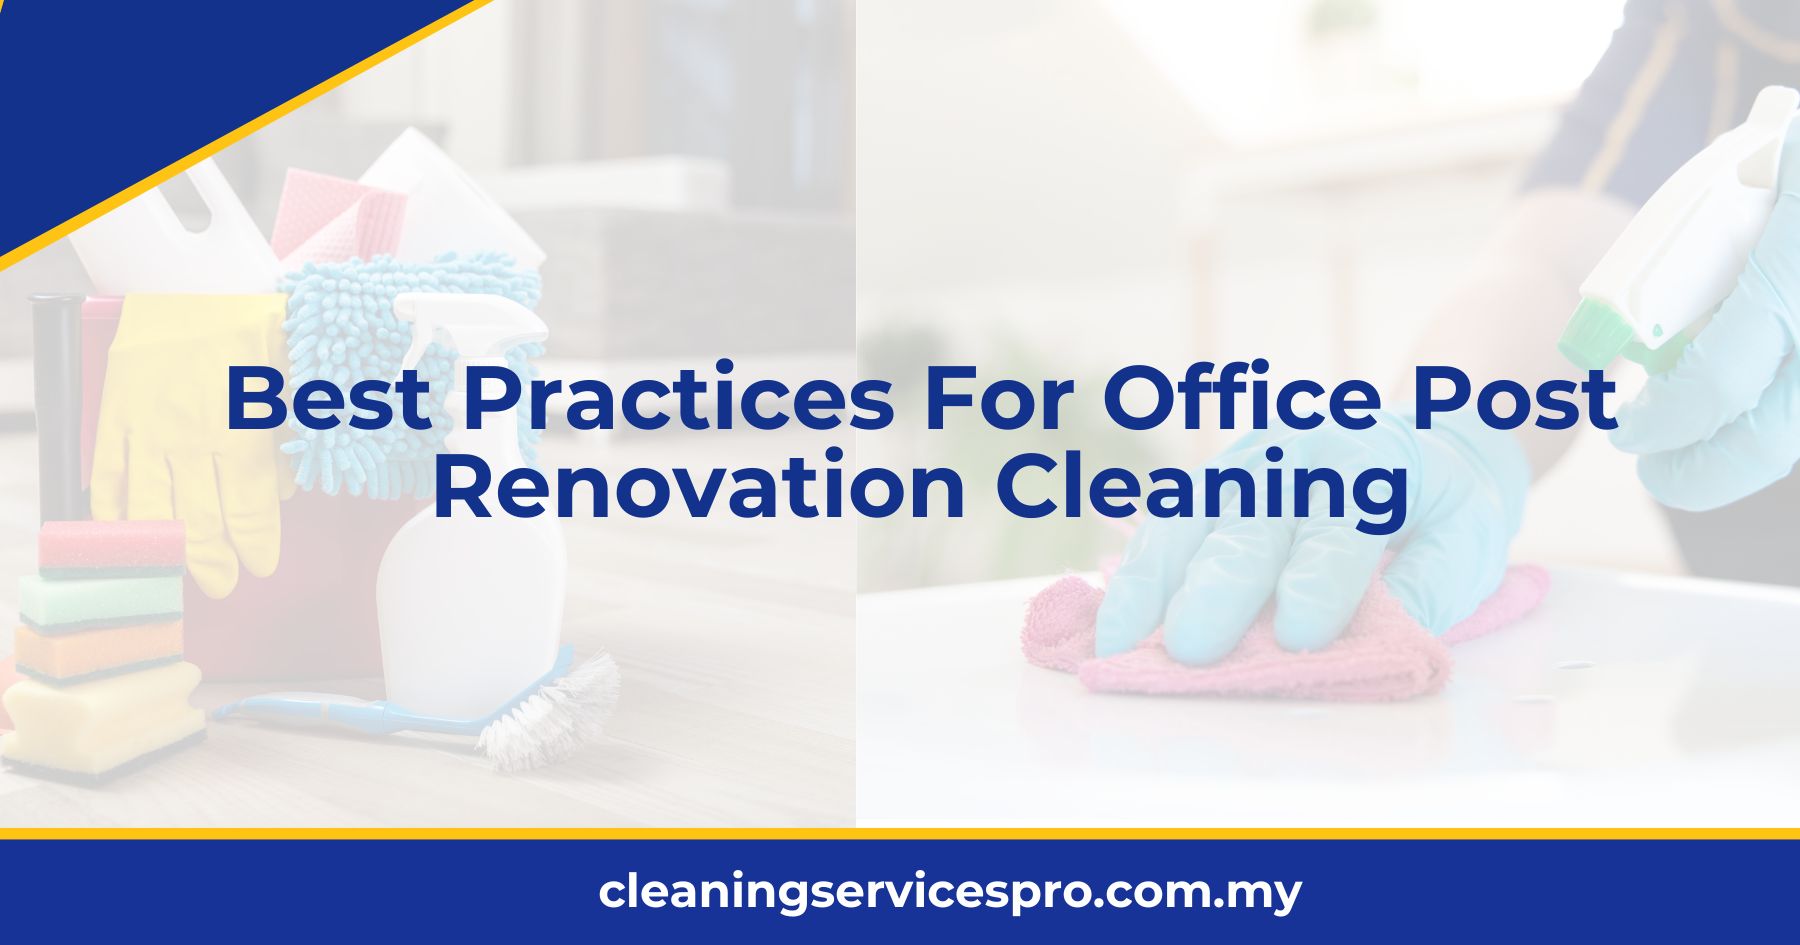 Best Practices For Office Post Renovation Cleaning